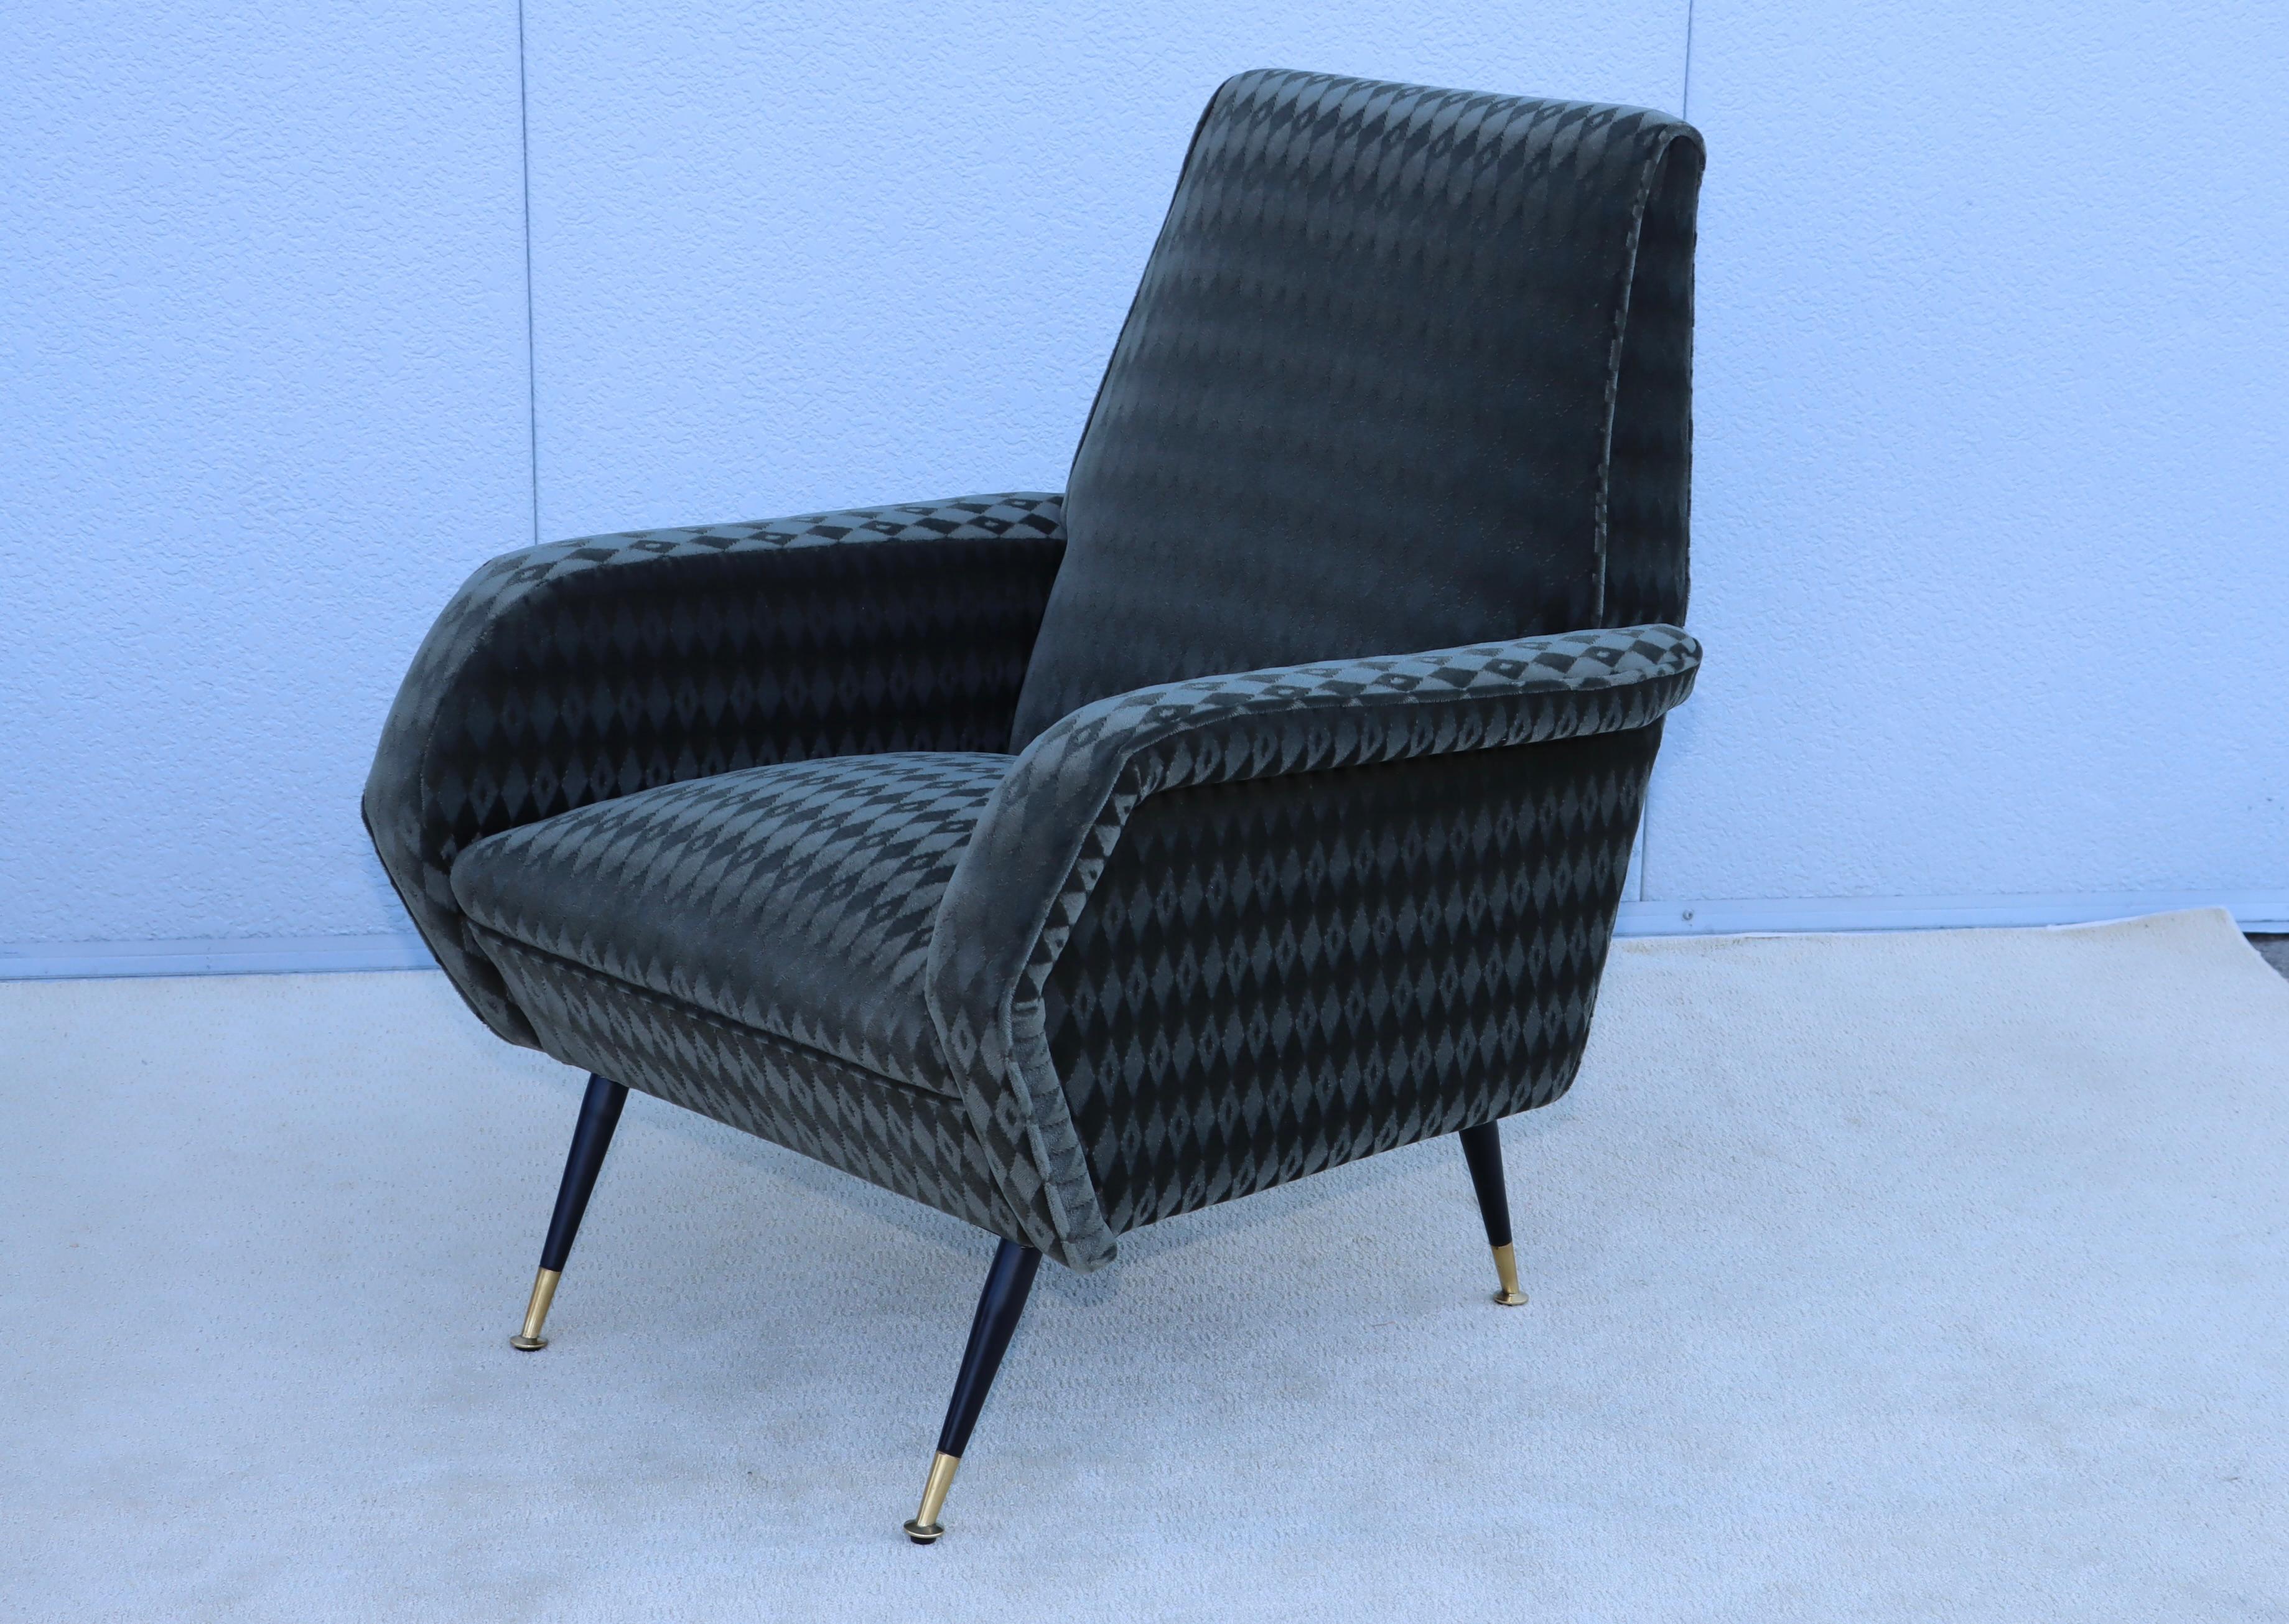 1950's Mid-Century Modern Italian Lounge Chairs With Donghia Mohair Upholstery For Sale 7